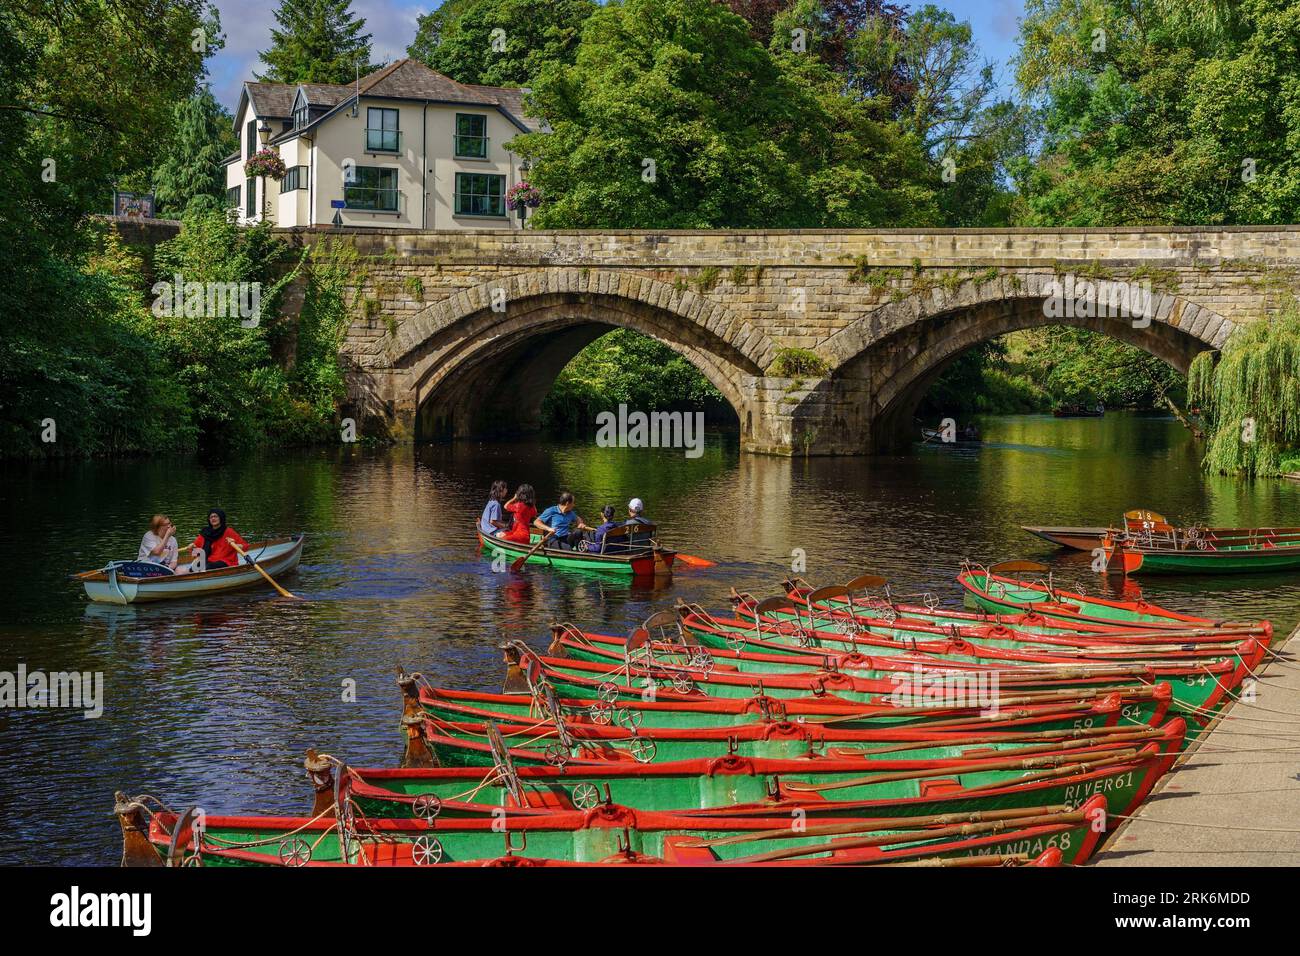 Green and red rowing boats moored in rows along the Nidd River, with rowers in two boats nearby, Knaresborough, North Yorkshire, UK. Stock Photo